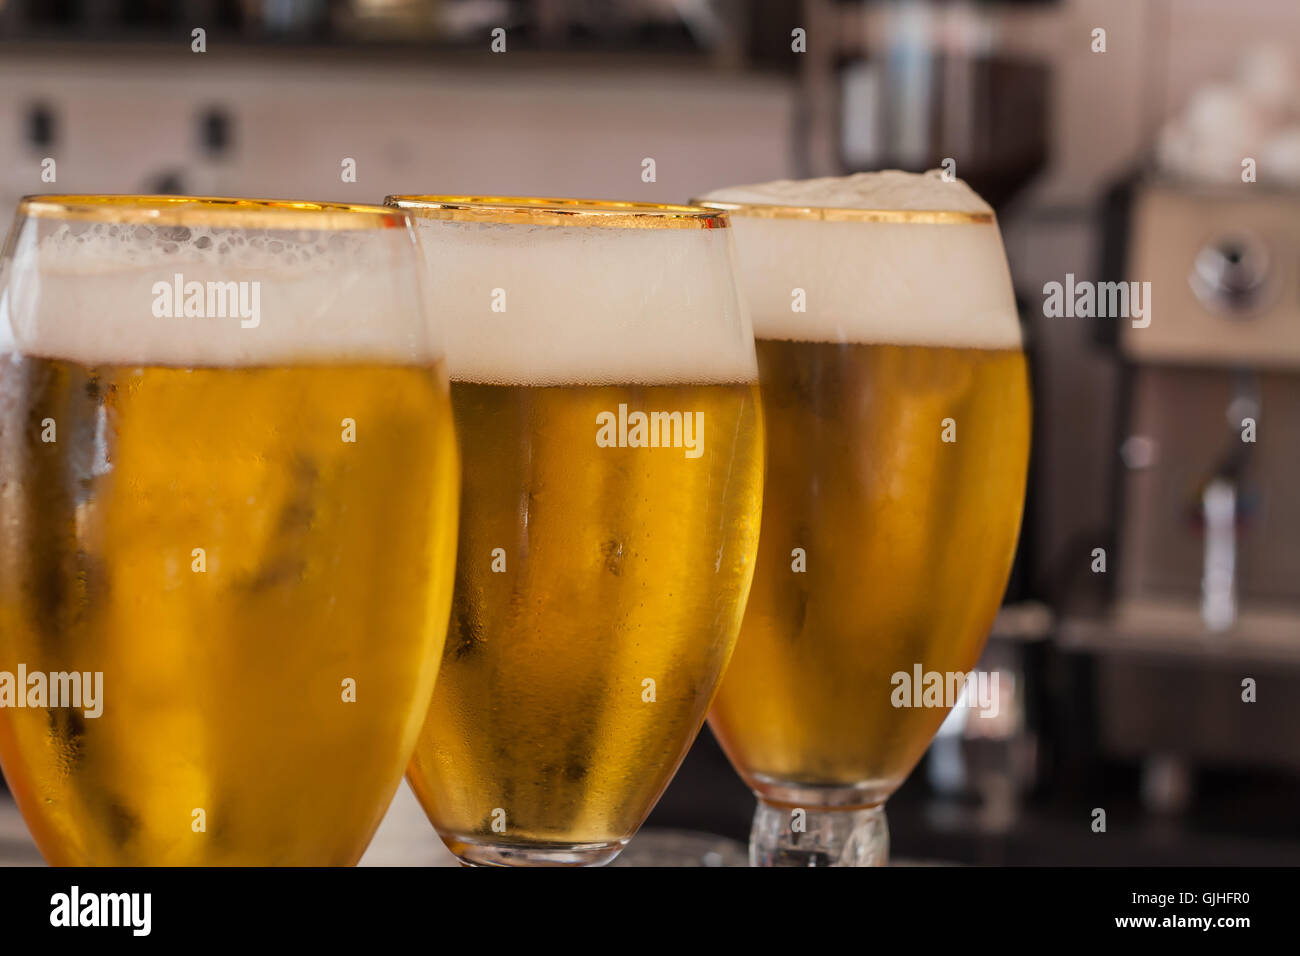 Three glasses of Fresh draught beer on bar Stock Photo